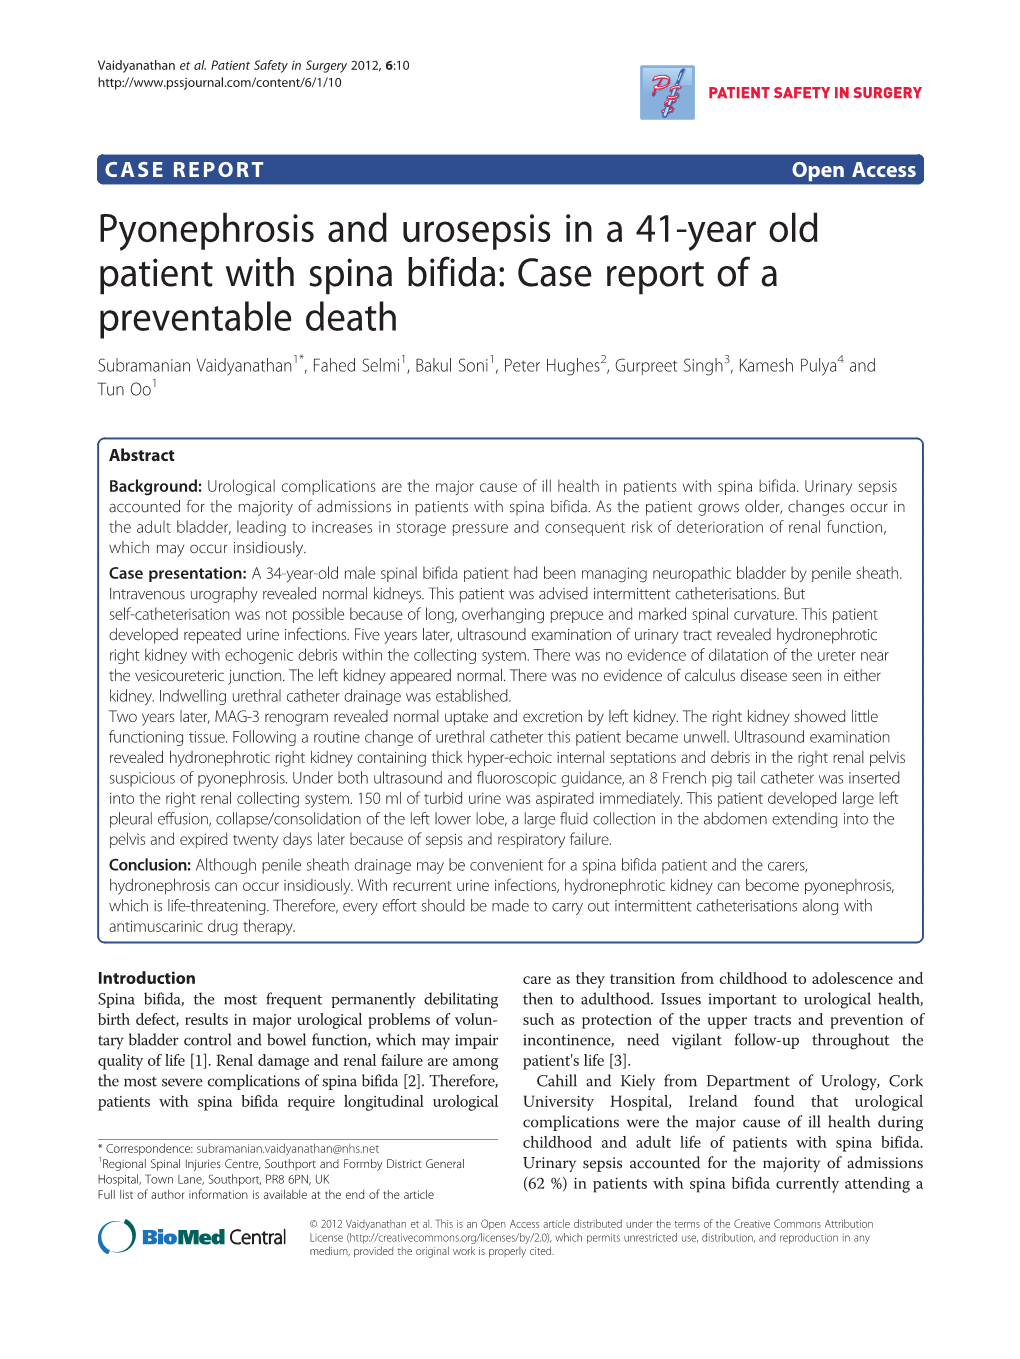 Pyonephrosis and Urosepsis in a 41-Year Old Patient